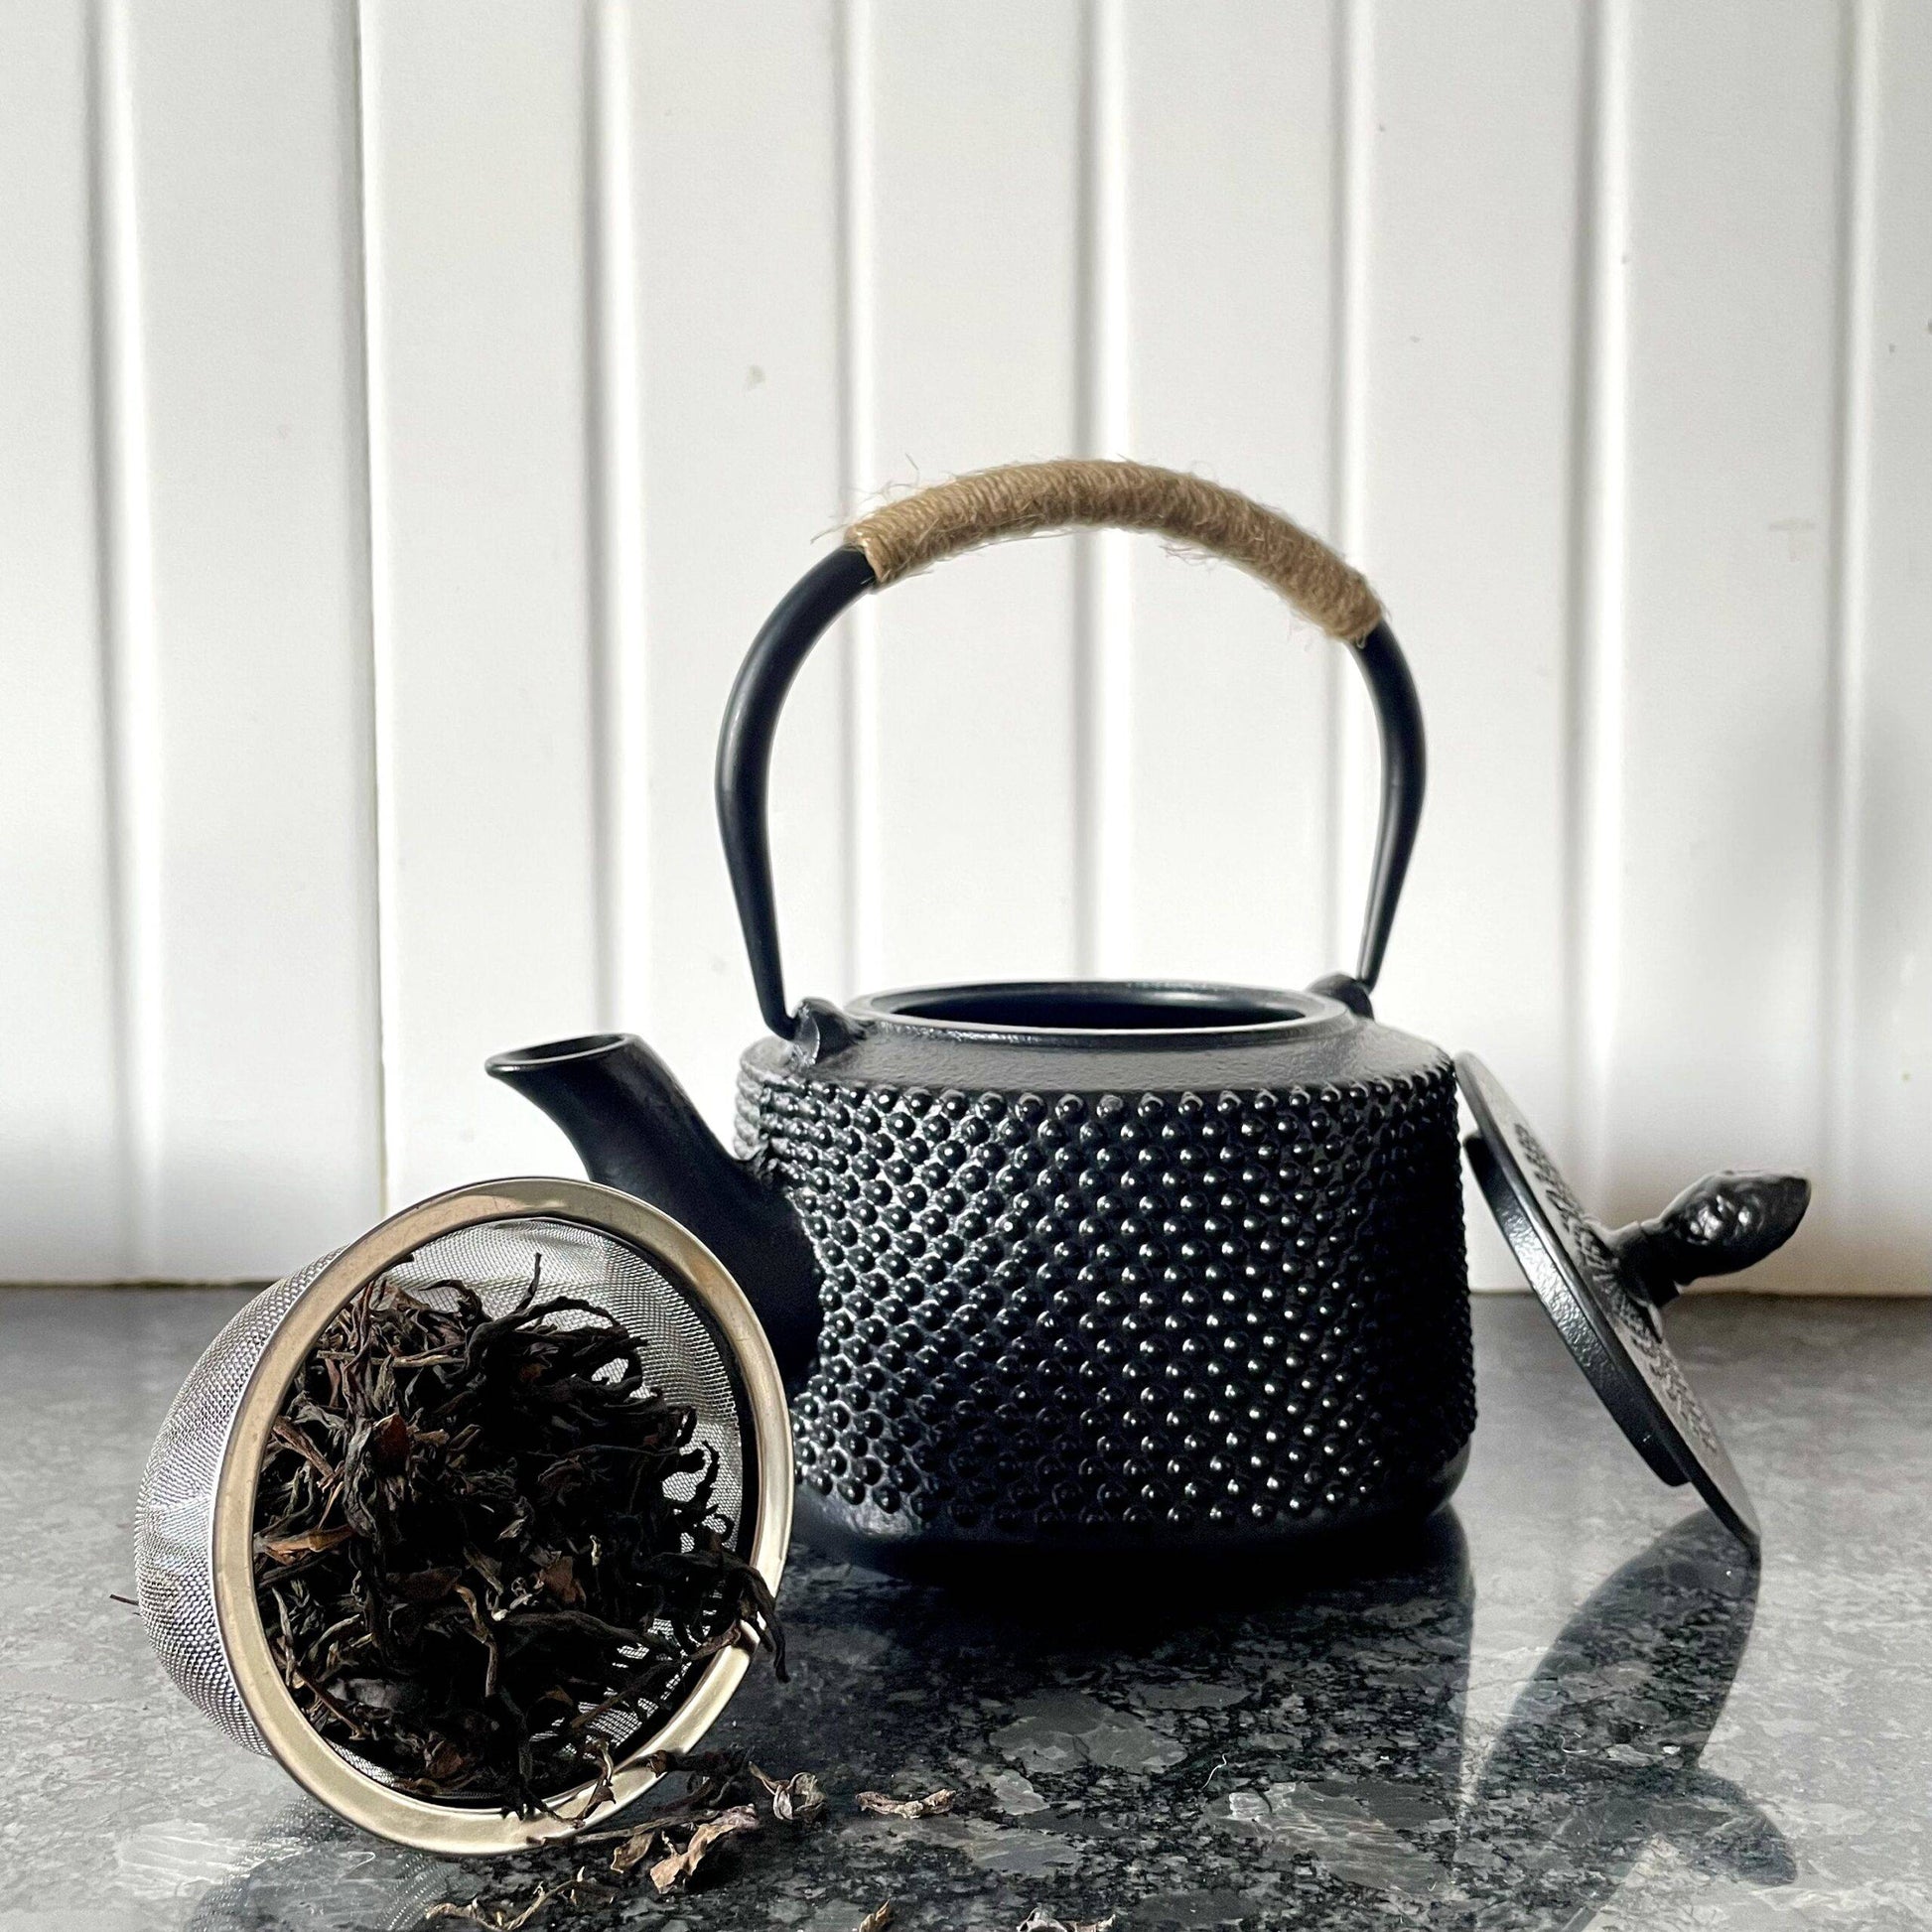 Cast-Iron Hobnail TeaPot - Traditional Japanese Tetsubin (Tetsu-Kyusu Black Arare patterned TeaPot 580ml Lid with Stainless Steel Infuser